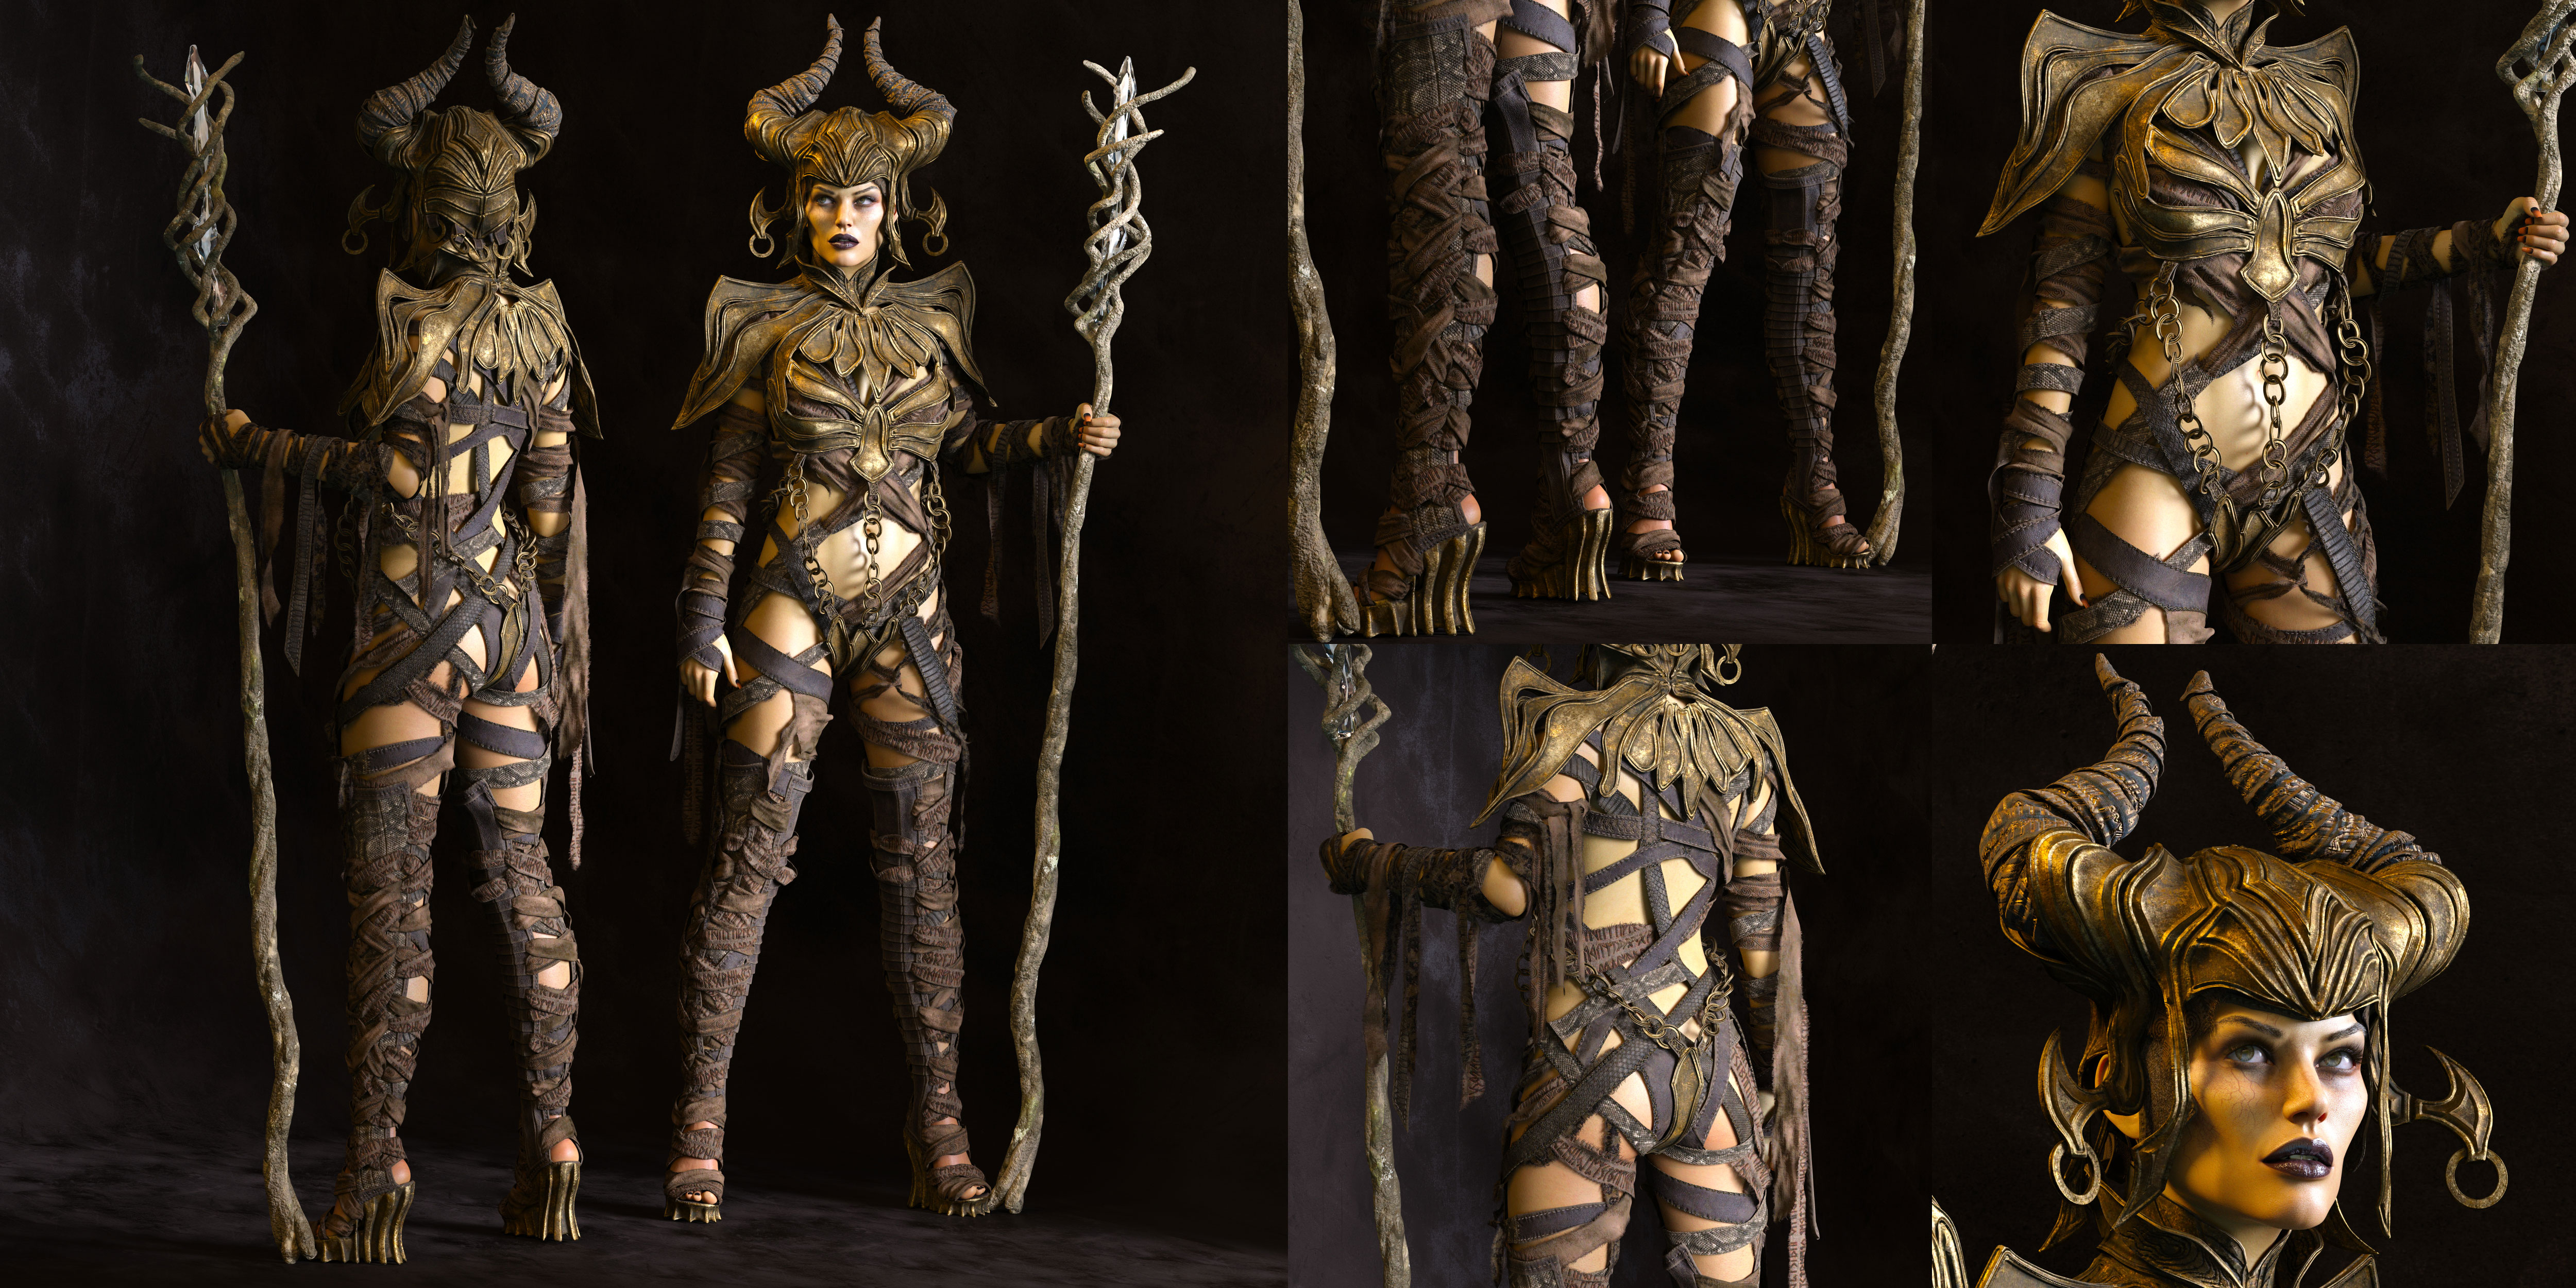 Black Magic Queen Outfit with dForce for Genesis 8 and 8.1 Females by: Linday, 3D Models by Daz 3D